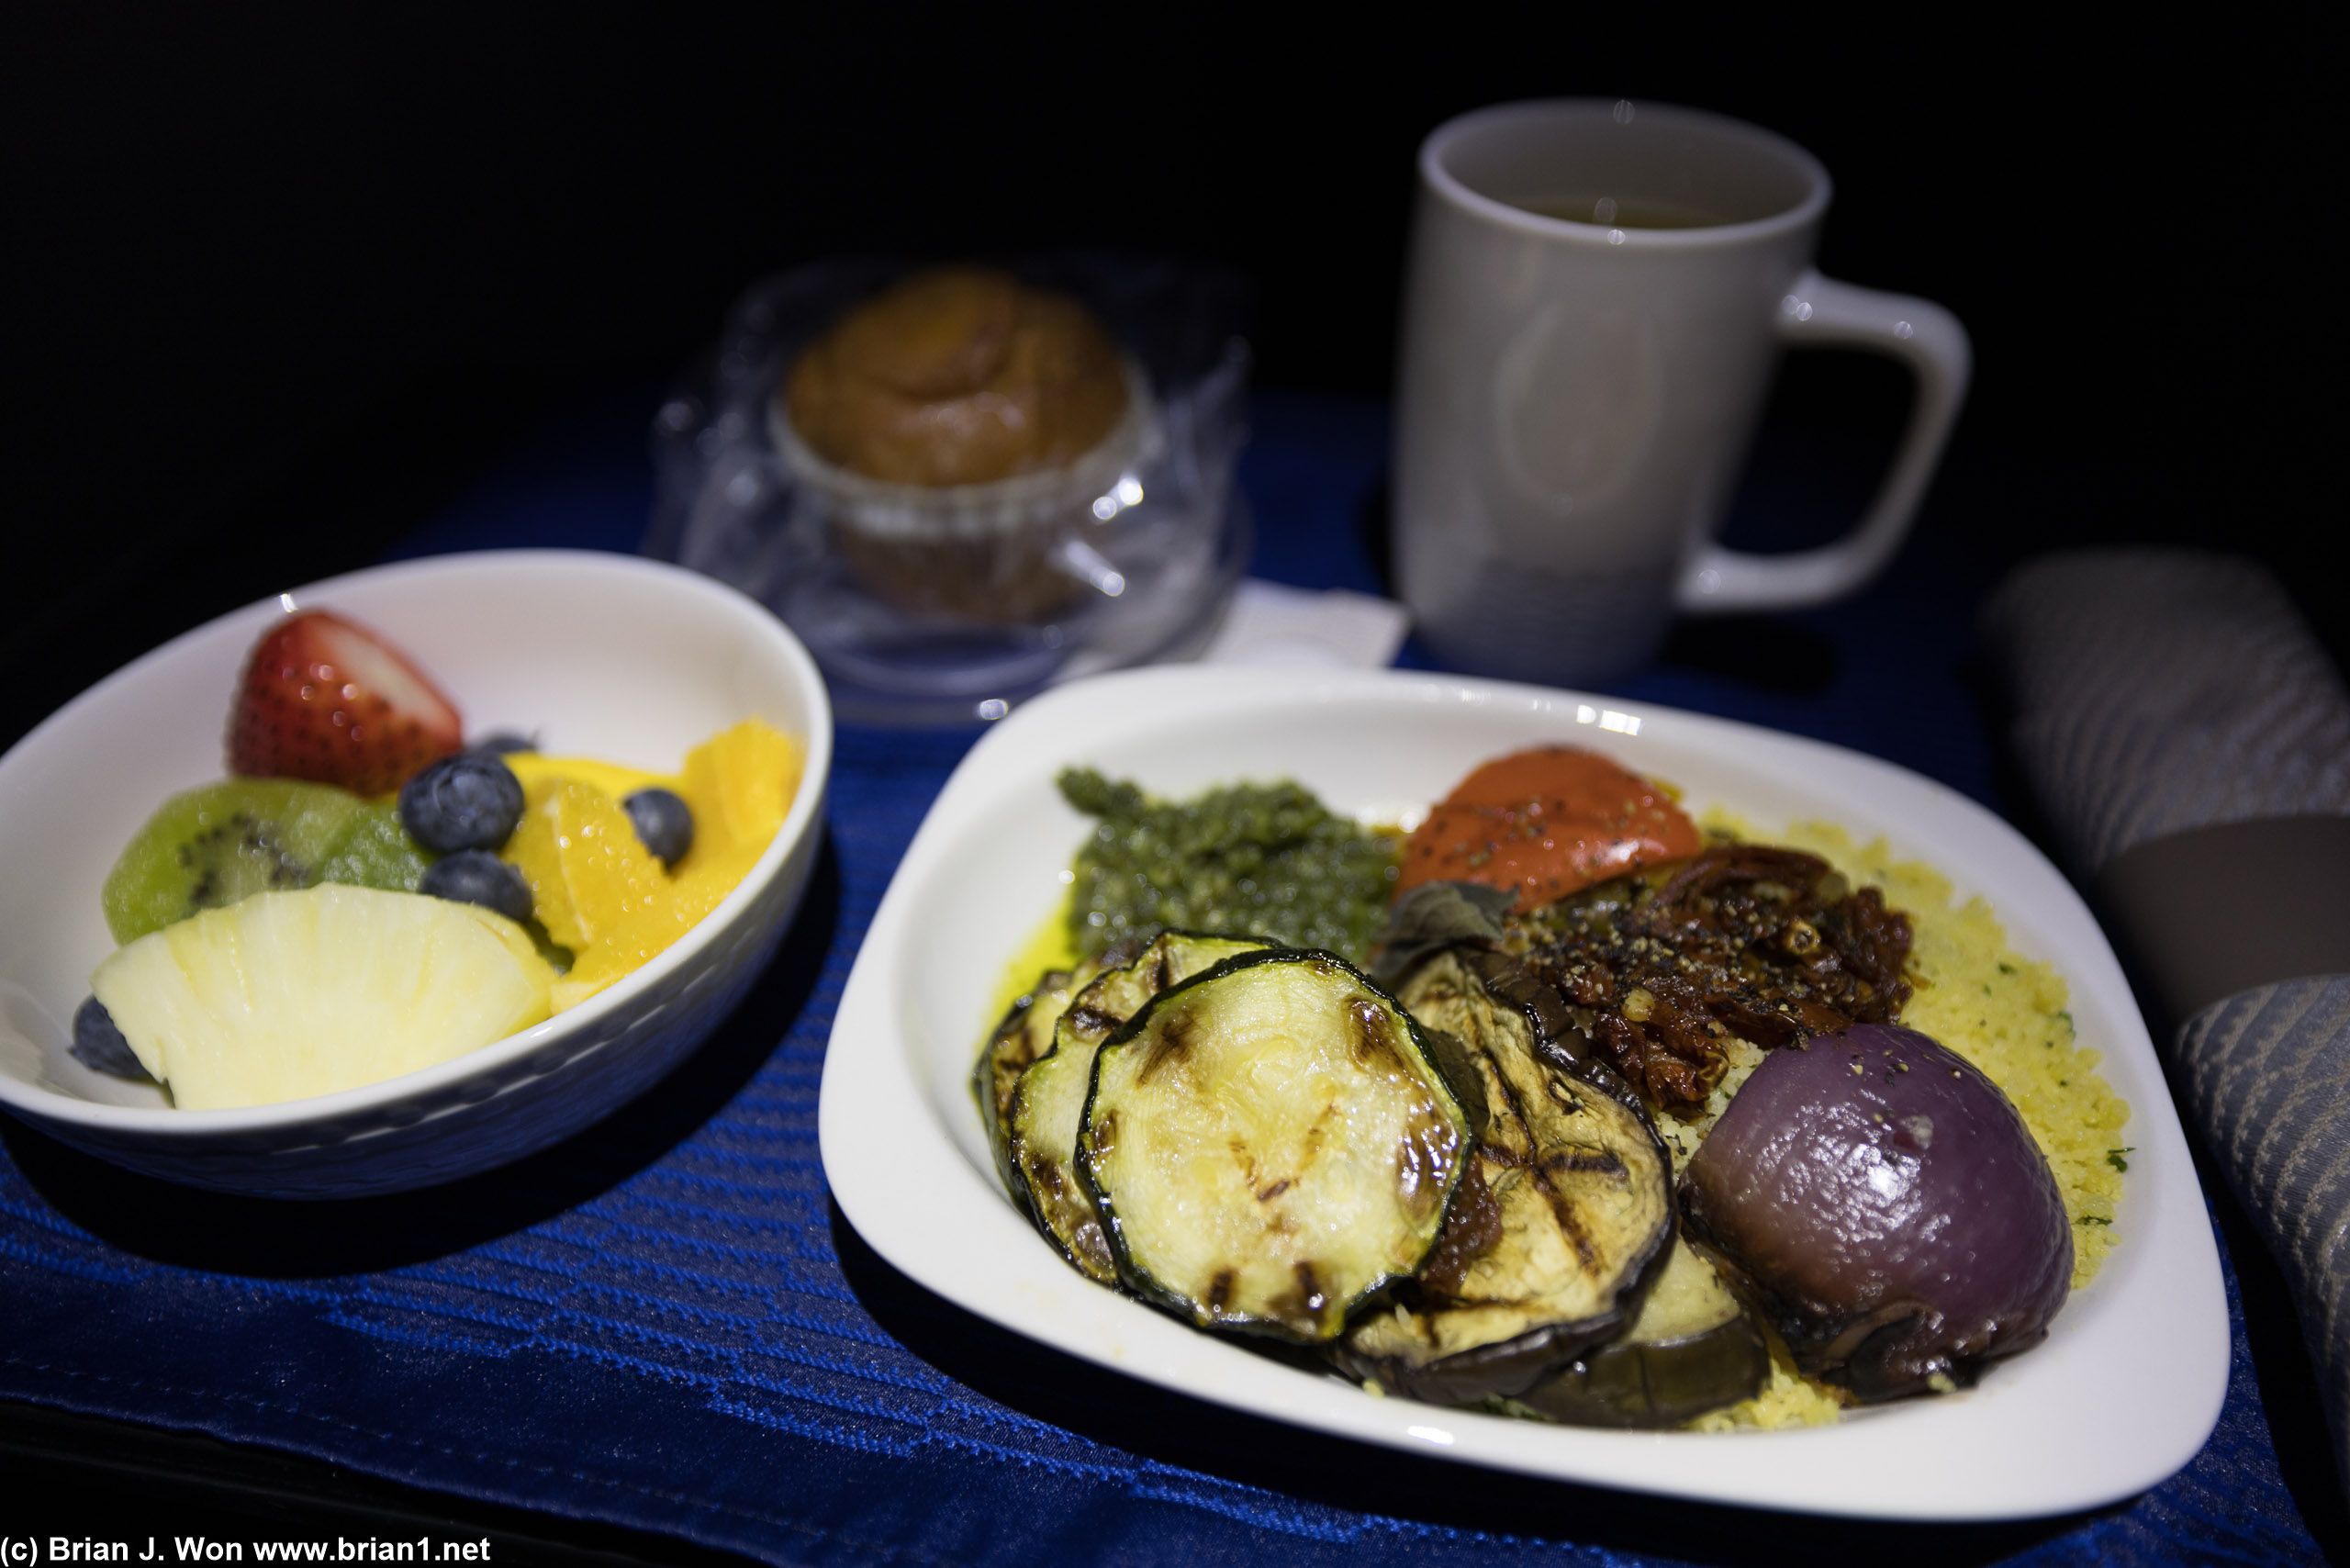 Pre-arrival meal. Went with the veggies. Very Mediterranean choices on MUC-SFO.